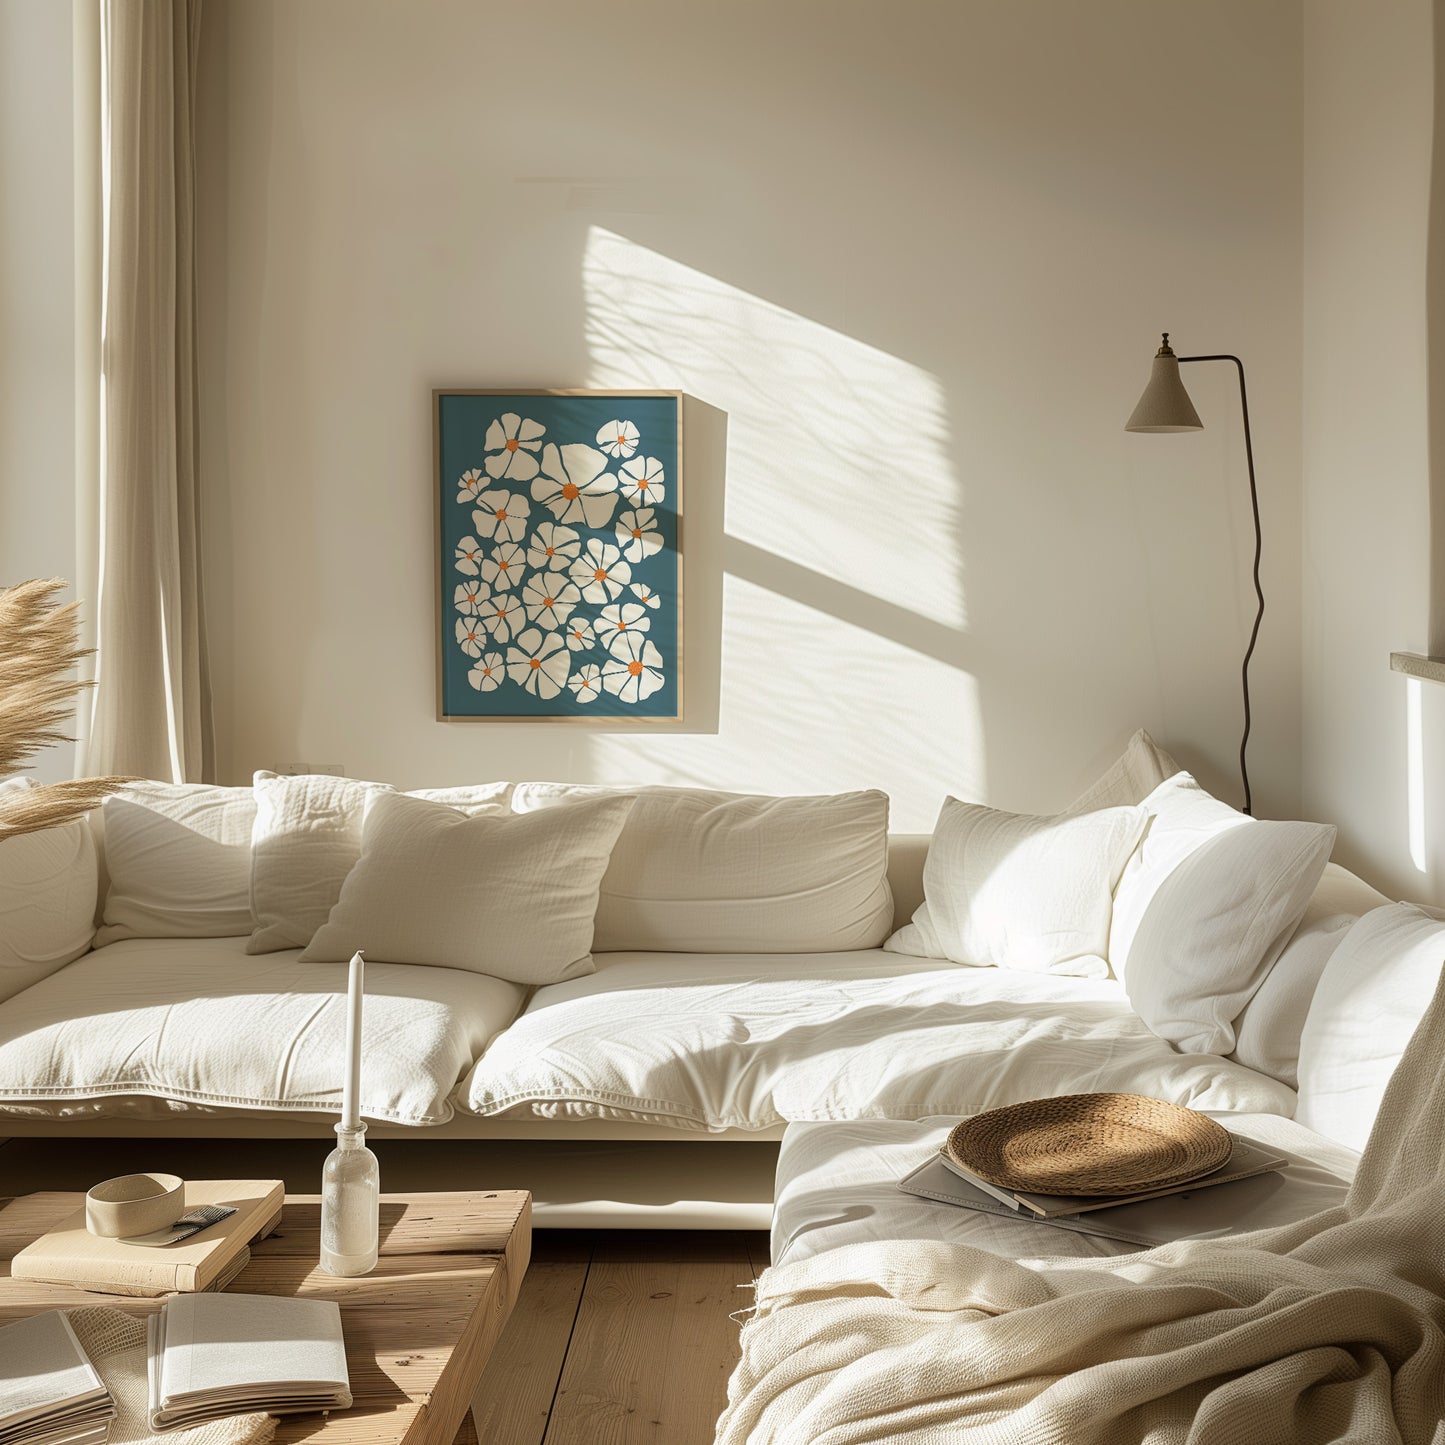 A cozy sunlit living room with a white sofa, wall art, and warm decor.